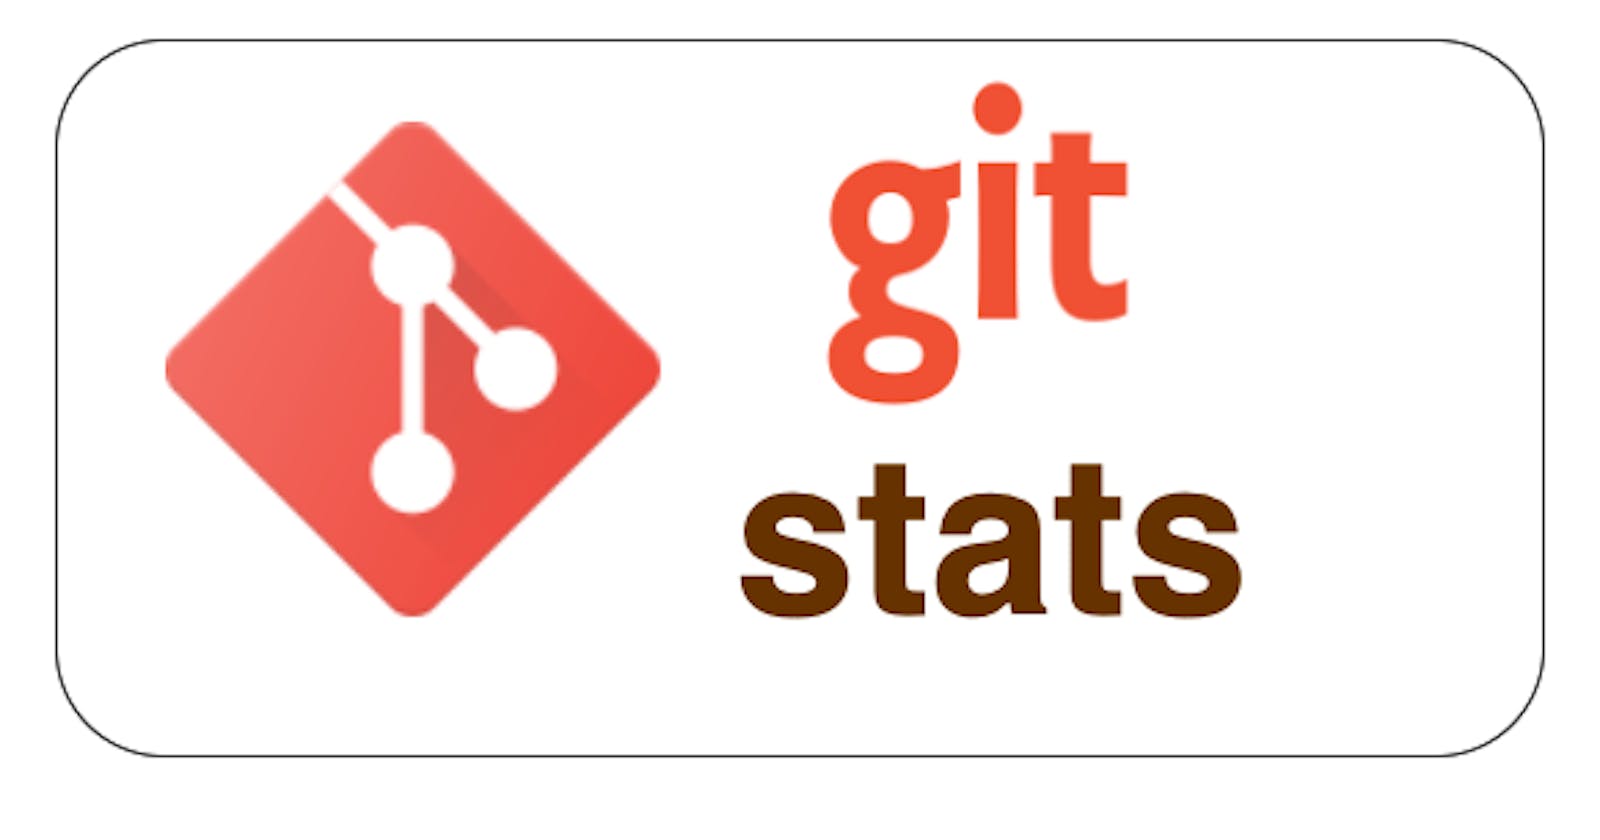 Git Quick Stats for your repository